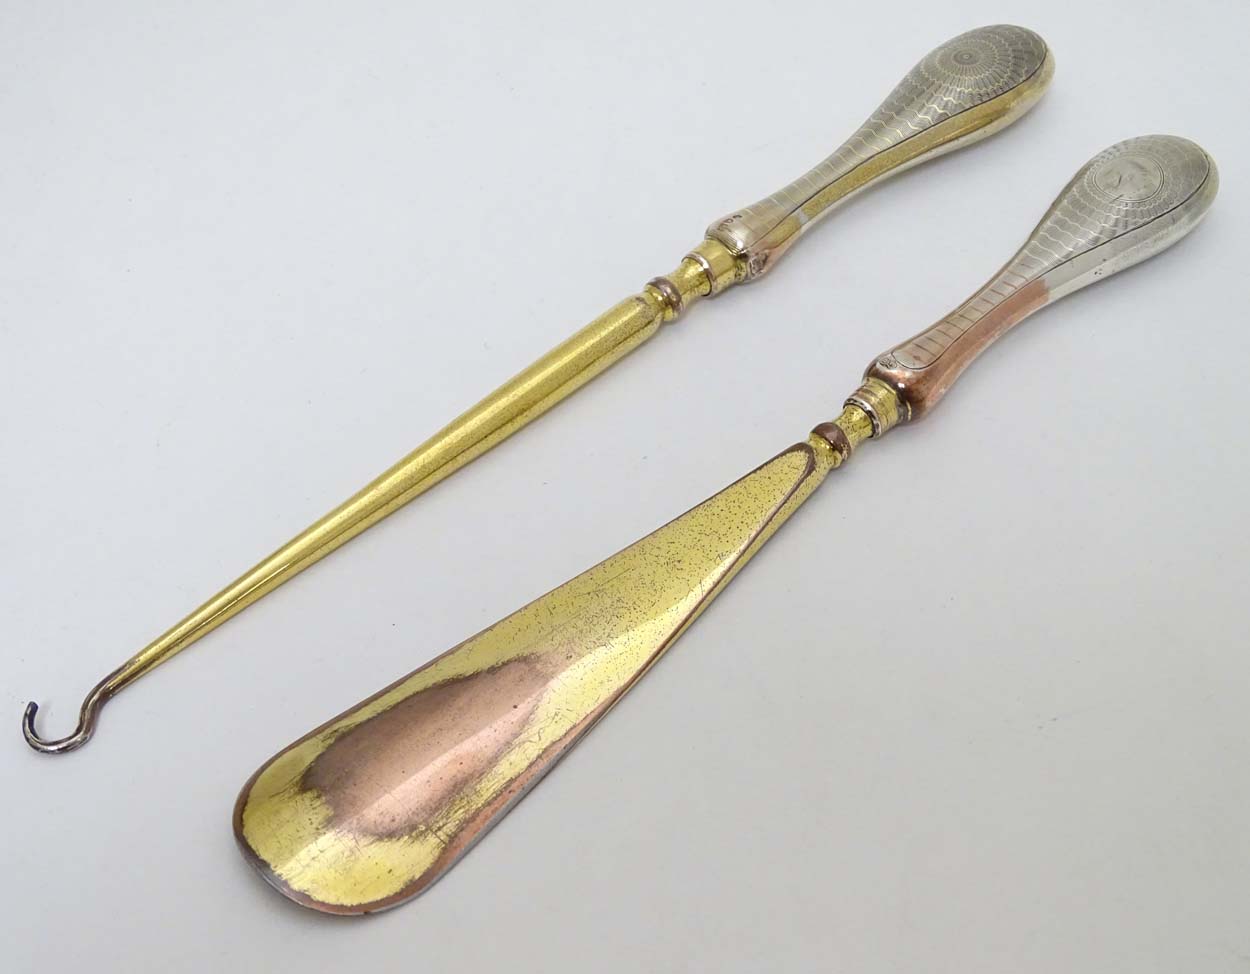 Silver handled button hook and shoe horn with engine turned decoration and traces of gilding.